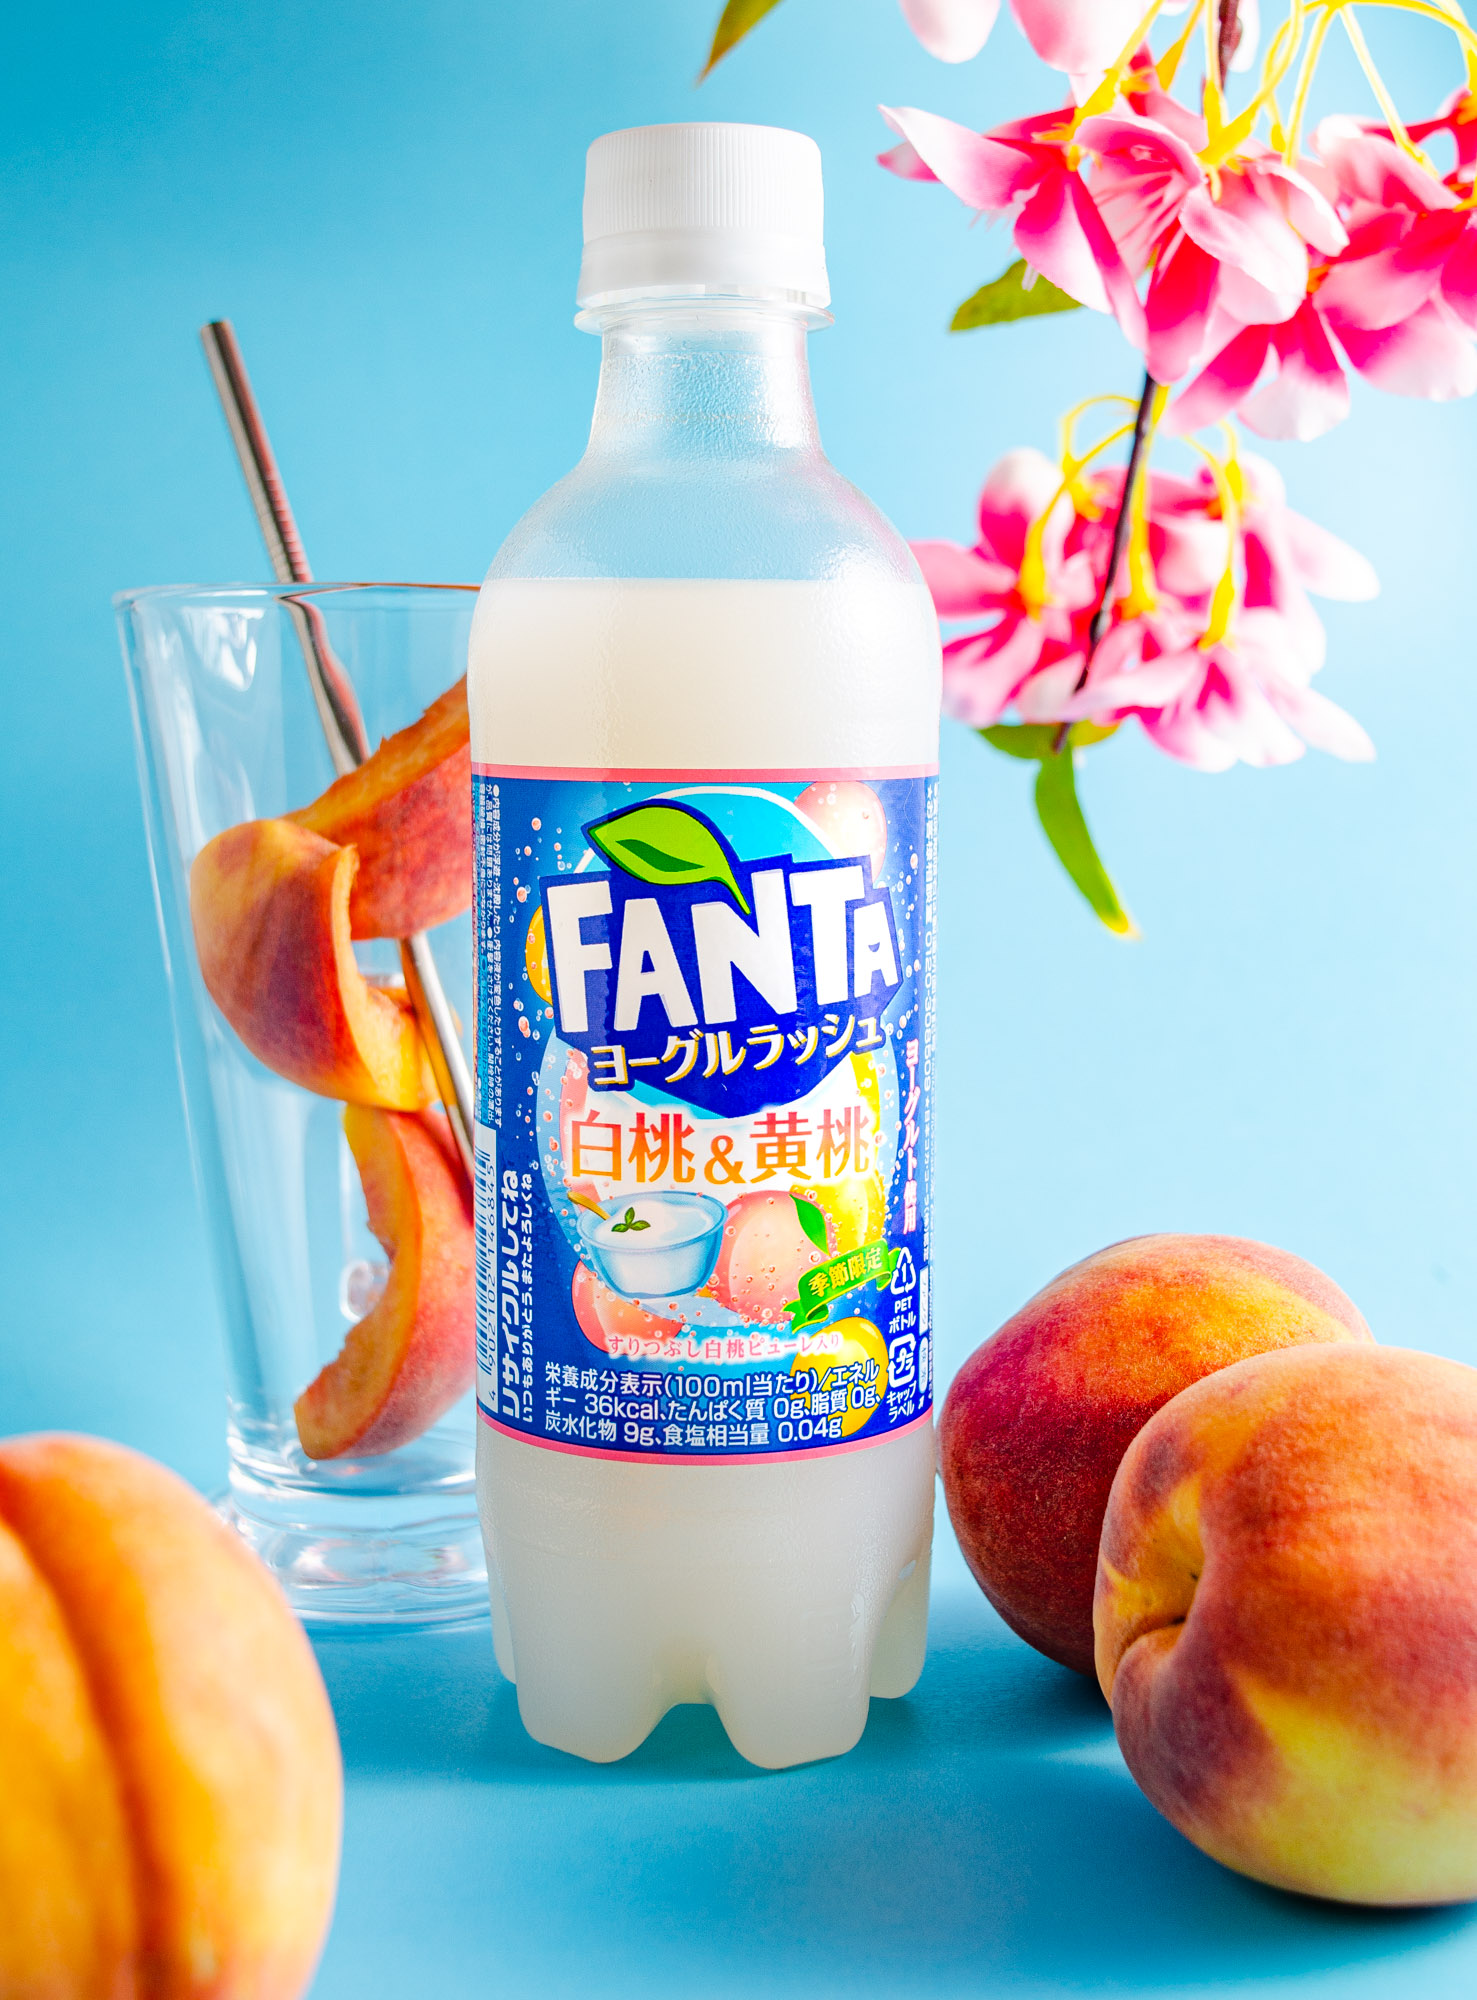 Fanta Peach yogurt with blossoms and sliced peaches on a blue background